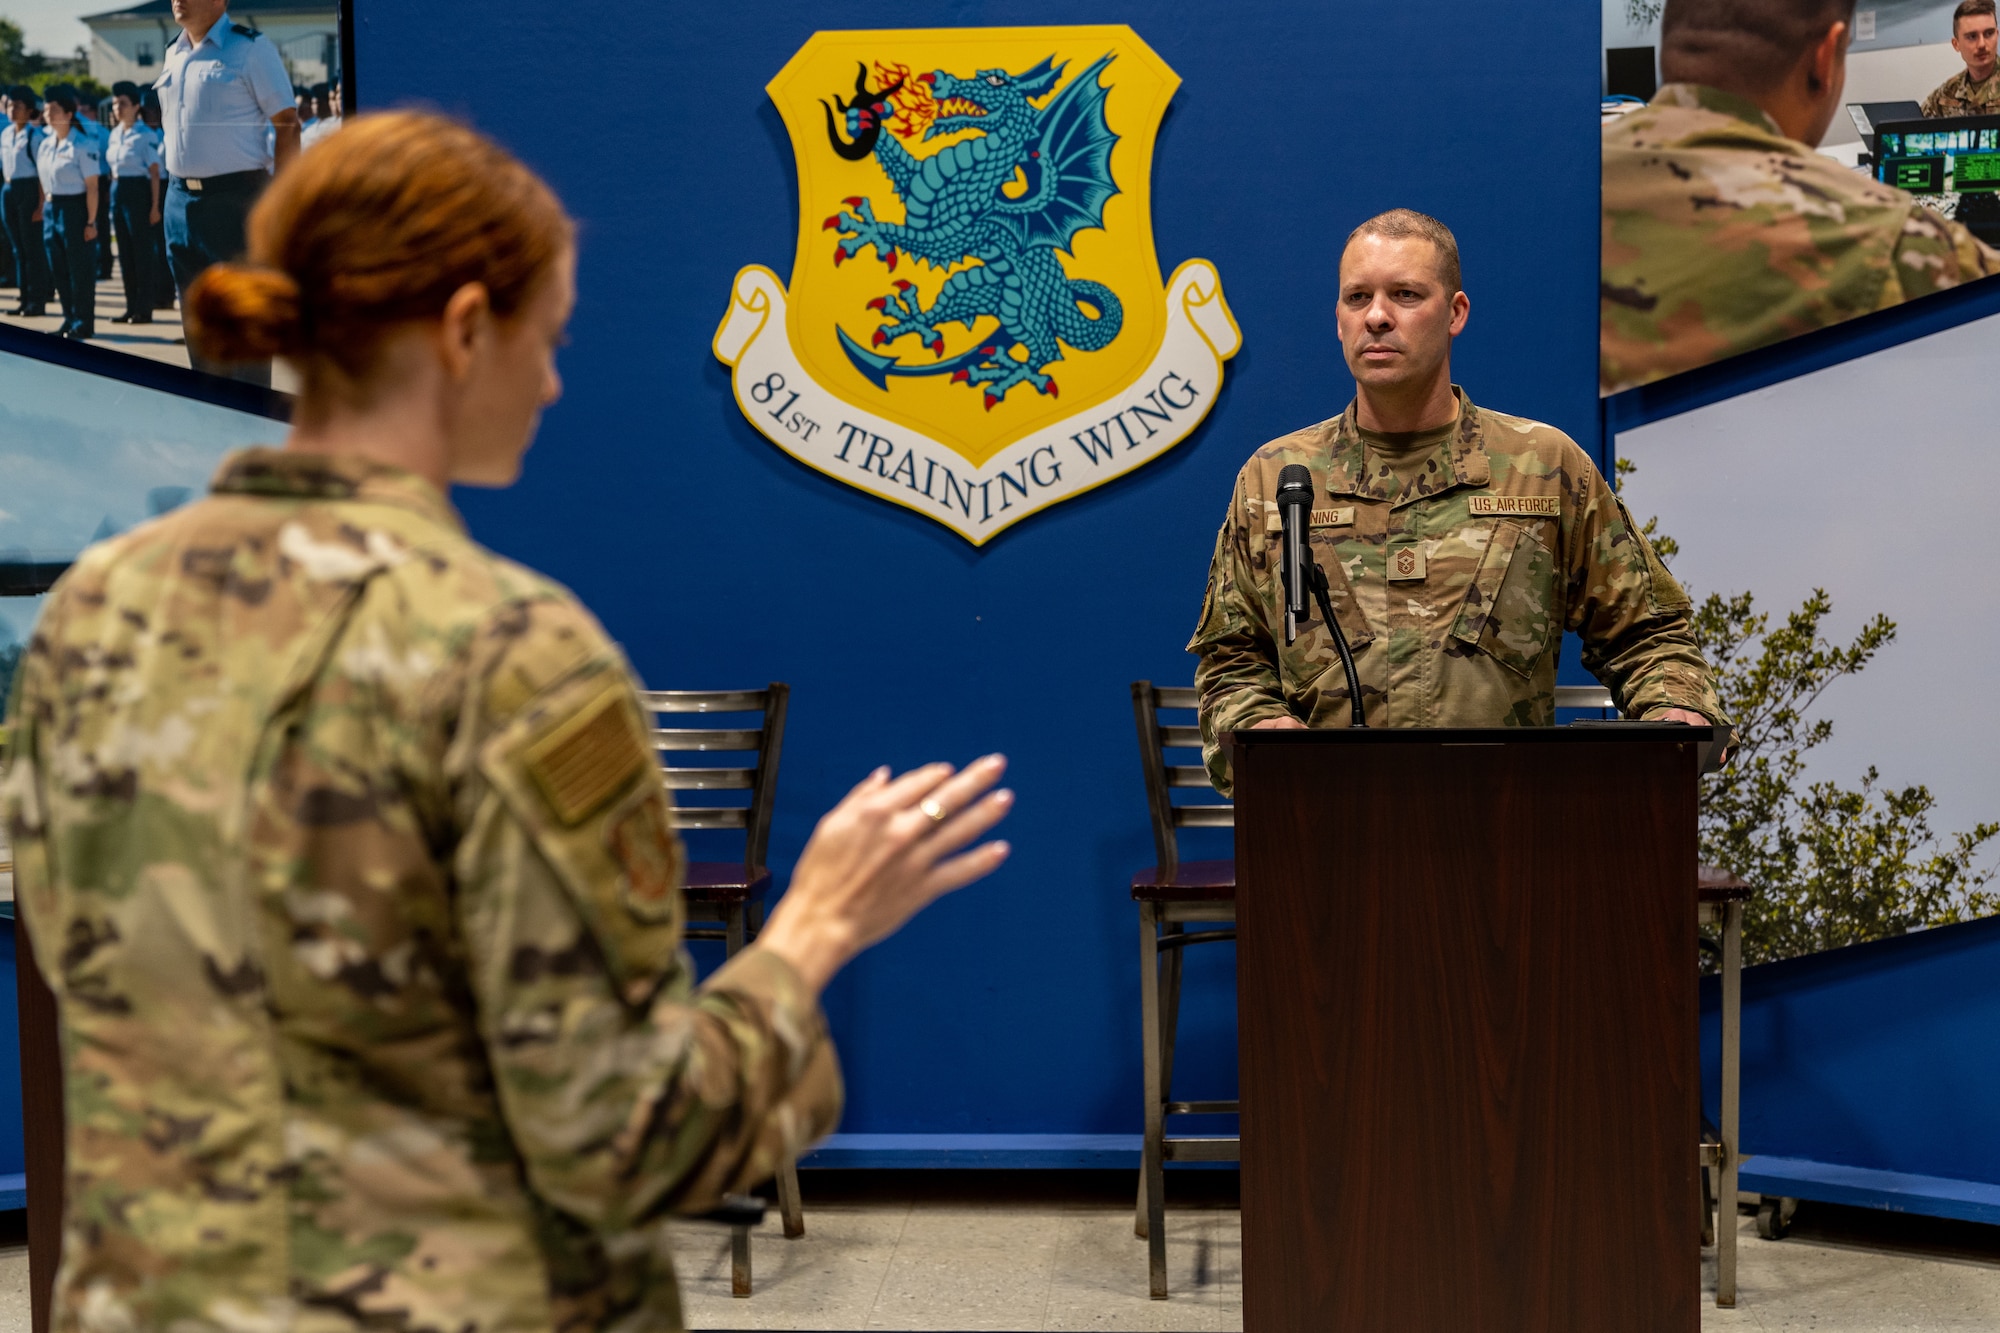 U.S. Air Force Airman 1st Class Elizabeth Davis, 81st Training Wing public affairs specialist, briefs Chief Master Sgt. Michael Venning, 81st Training Wing command chief, during his immersion tour at Keesler Air Force Base, Mississippi, Aug. 11, 2023.